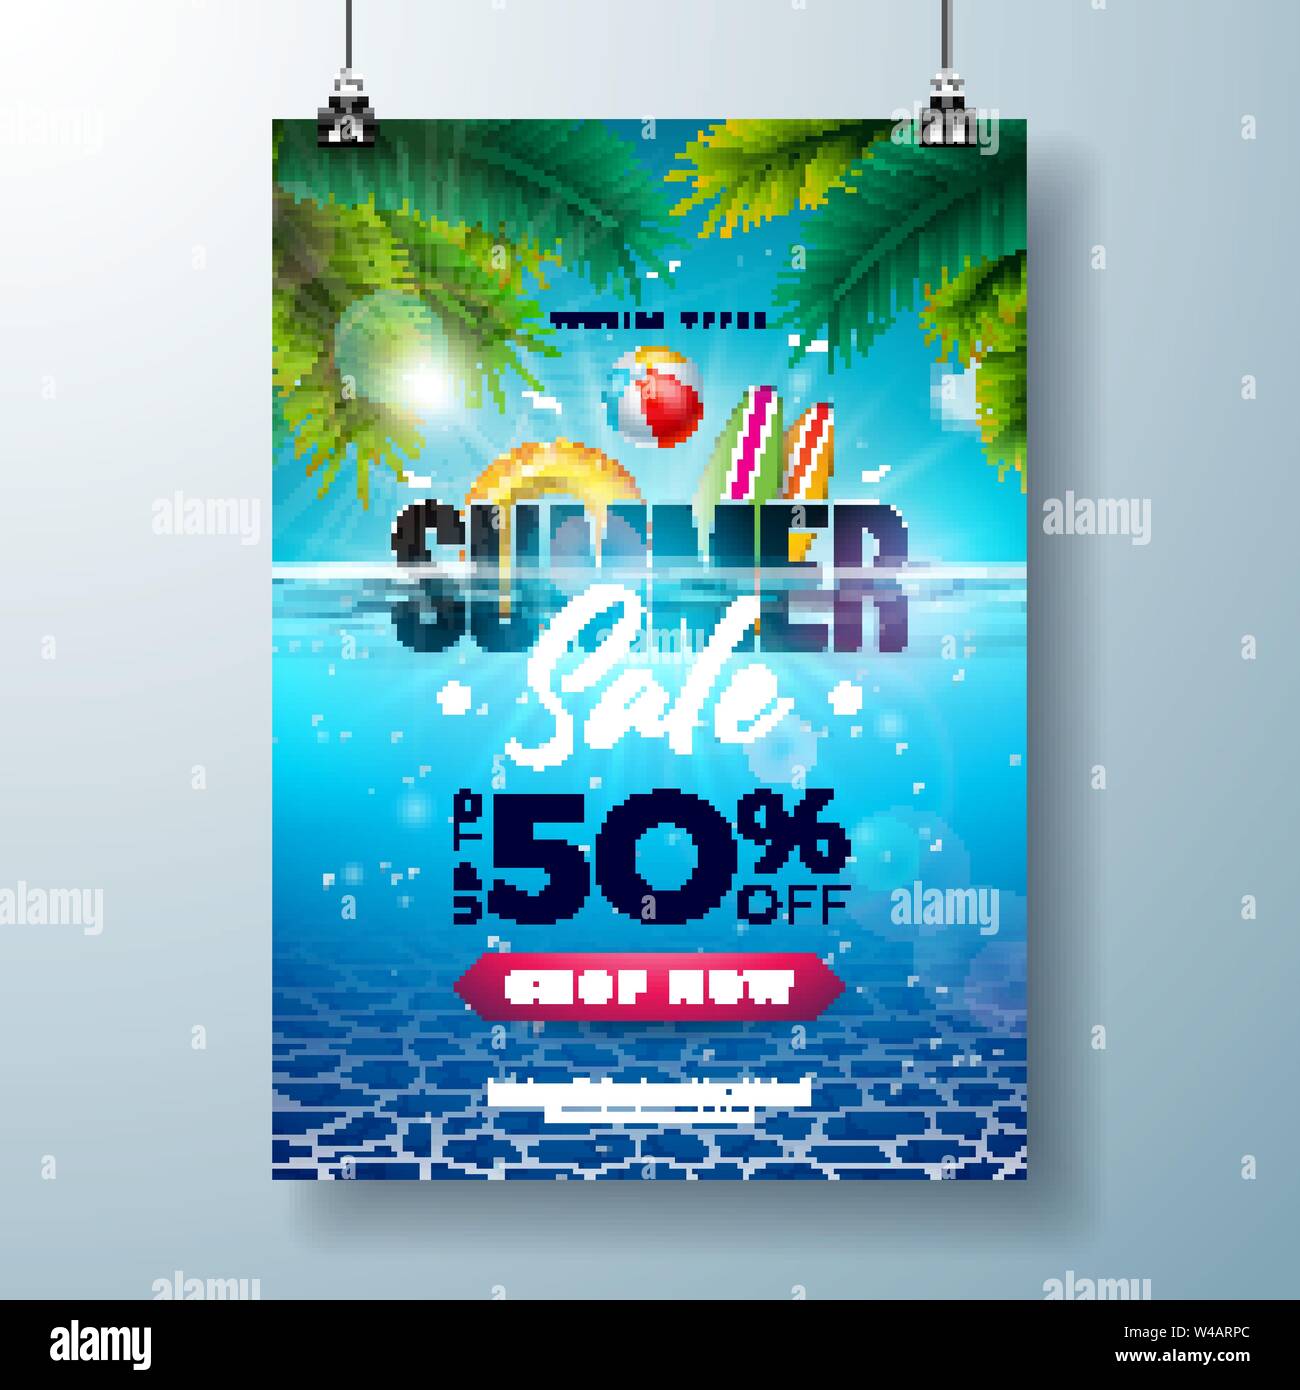 Clearance sale banner, flyer or poster design template Stock Vector Image &  Art - Alamy